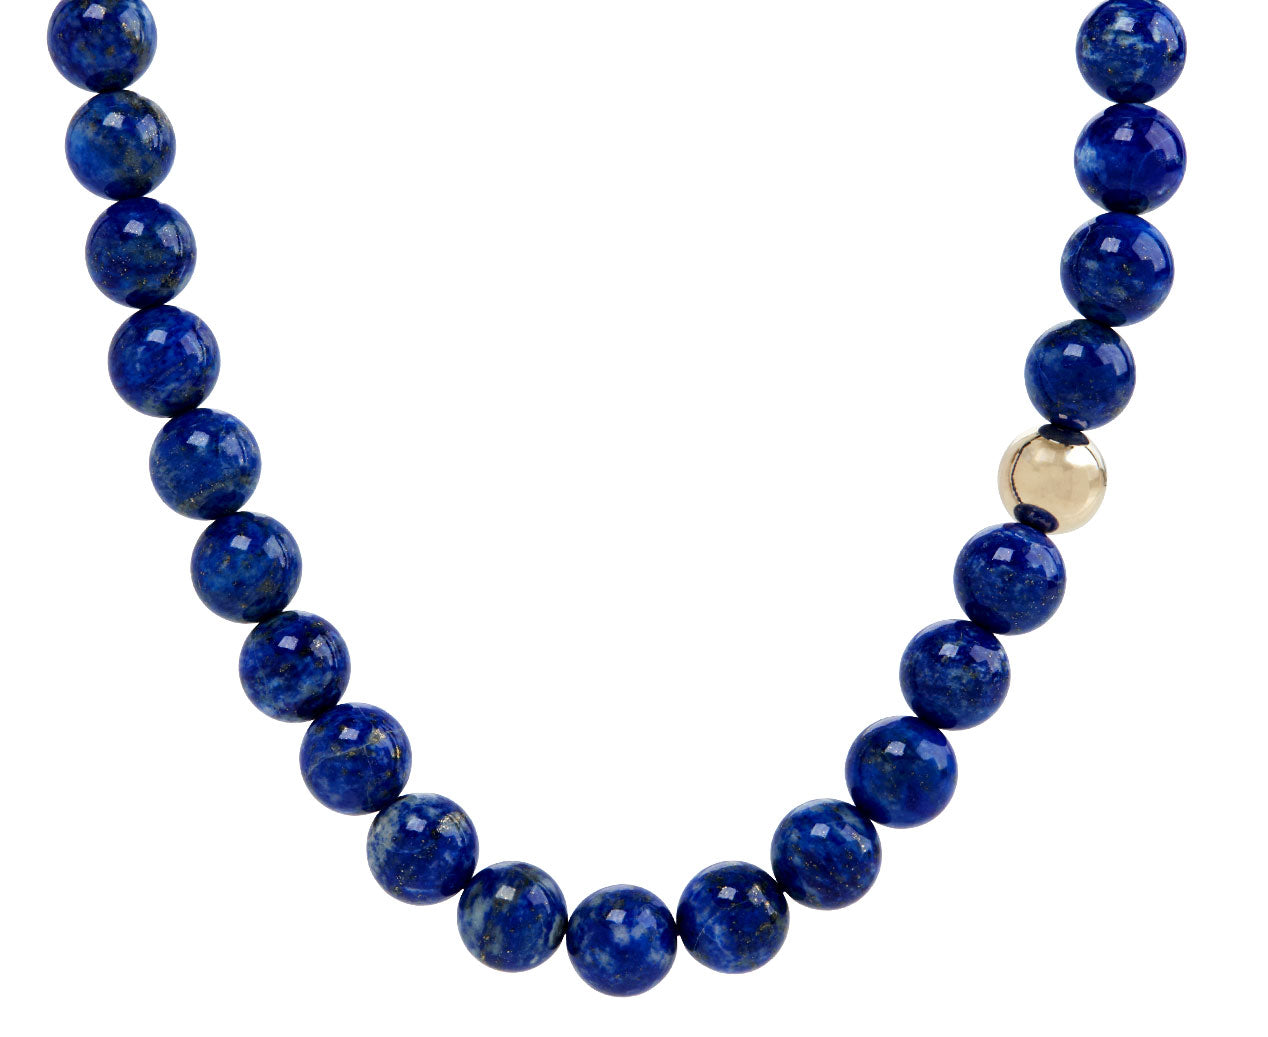 Triple Strand Water Pearl and Lapis Lazuli Beads Necklace